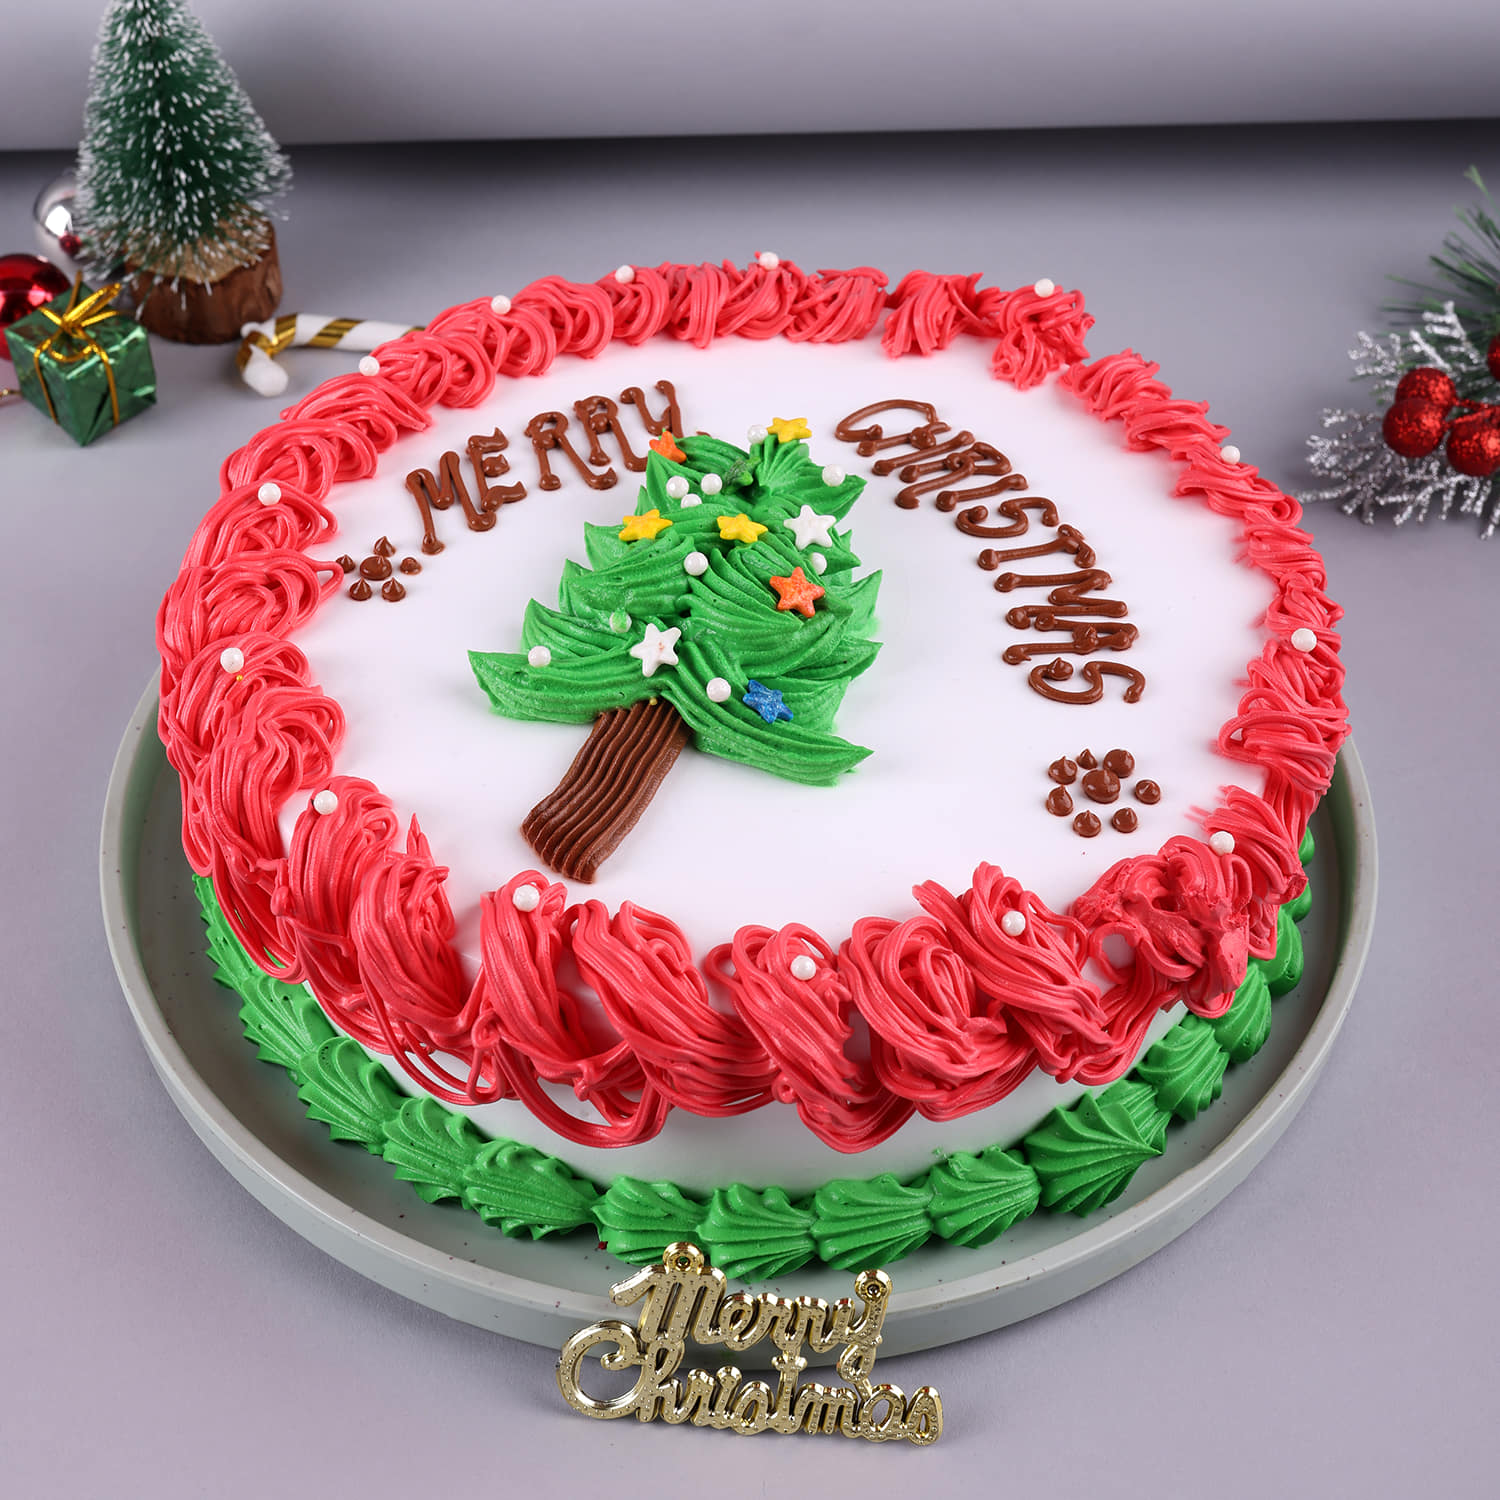 Decorating your Christmas Cake with Fondant Icing |